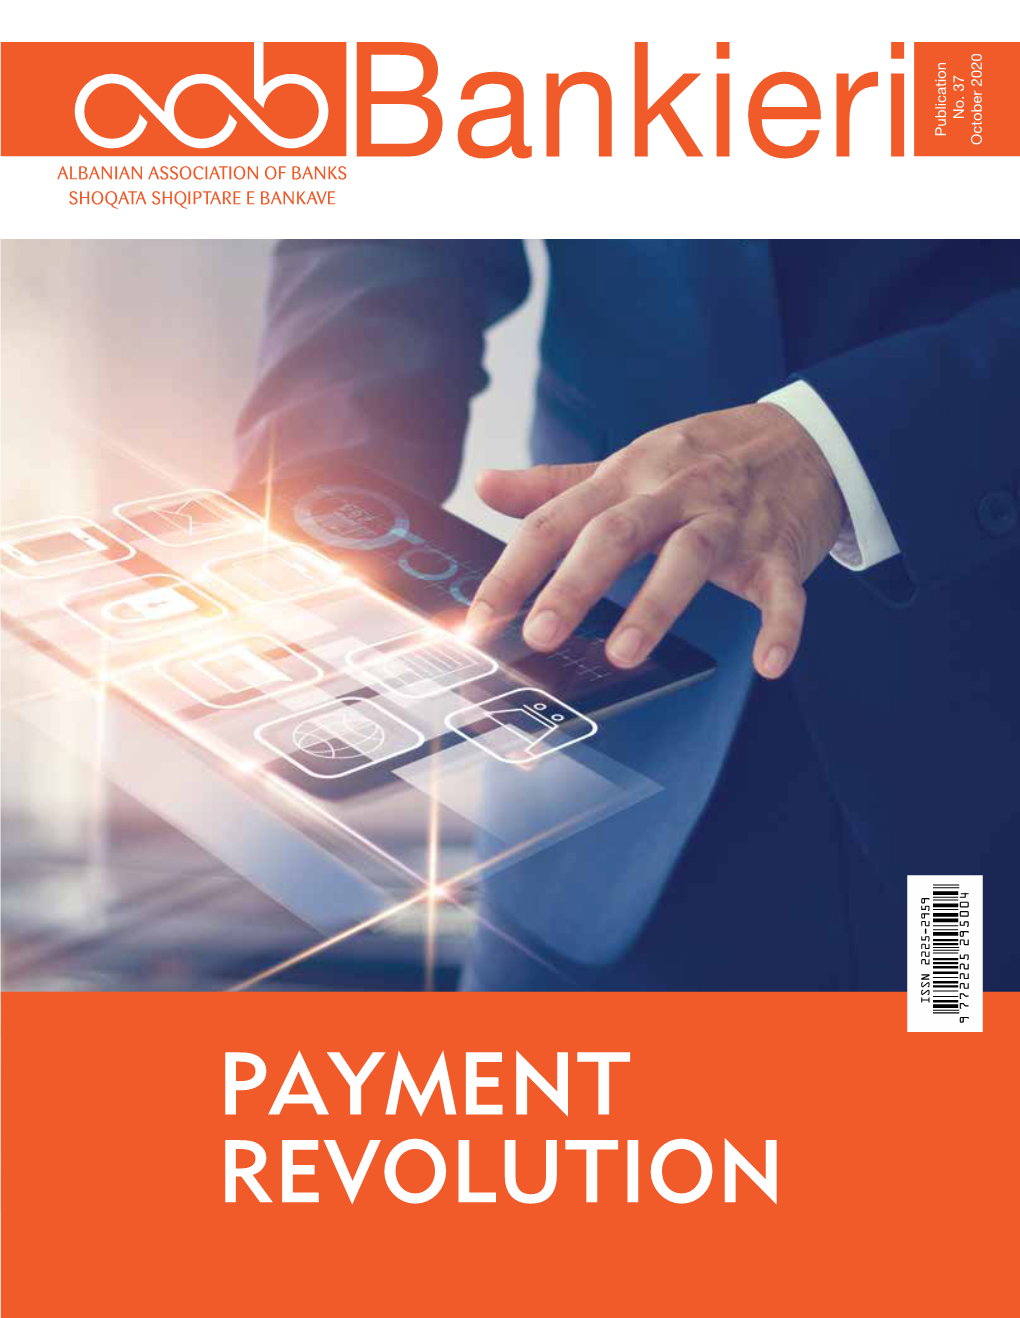 Payment Revolution in Albania - the "Creative Destruction" for a New Business Model in Banking Prof